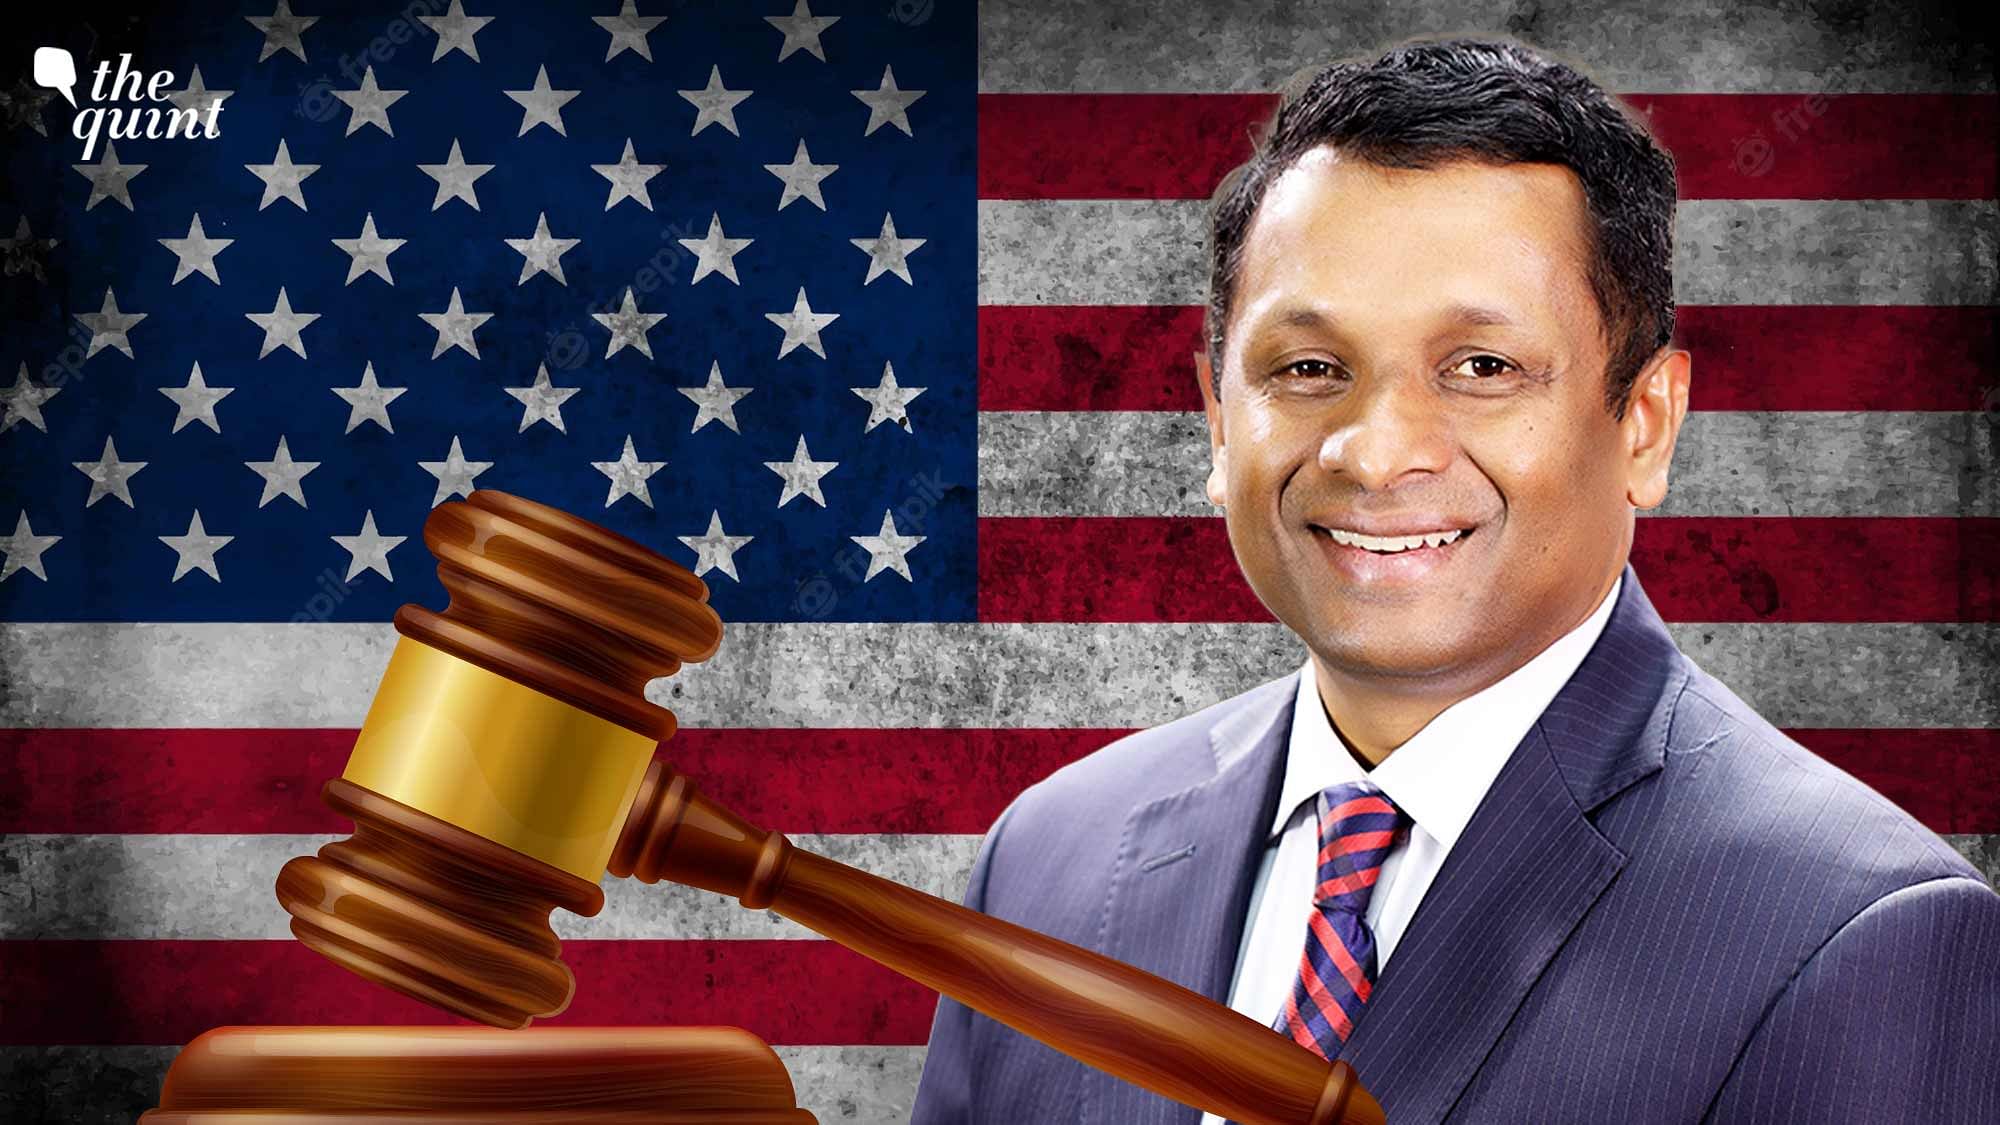 <div class="paragraphs"><p>Surendran K Pattel was sworn in as a judge in the 240th Judicial District Court in Texas' Fort Bend County on Sunday, 1 January.</p></div>